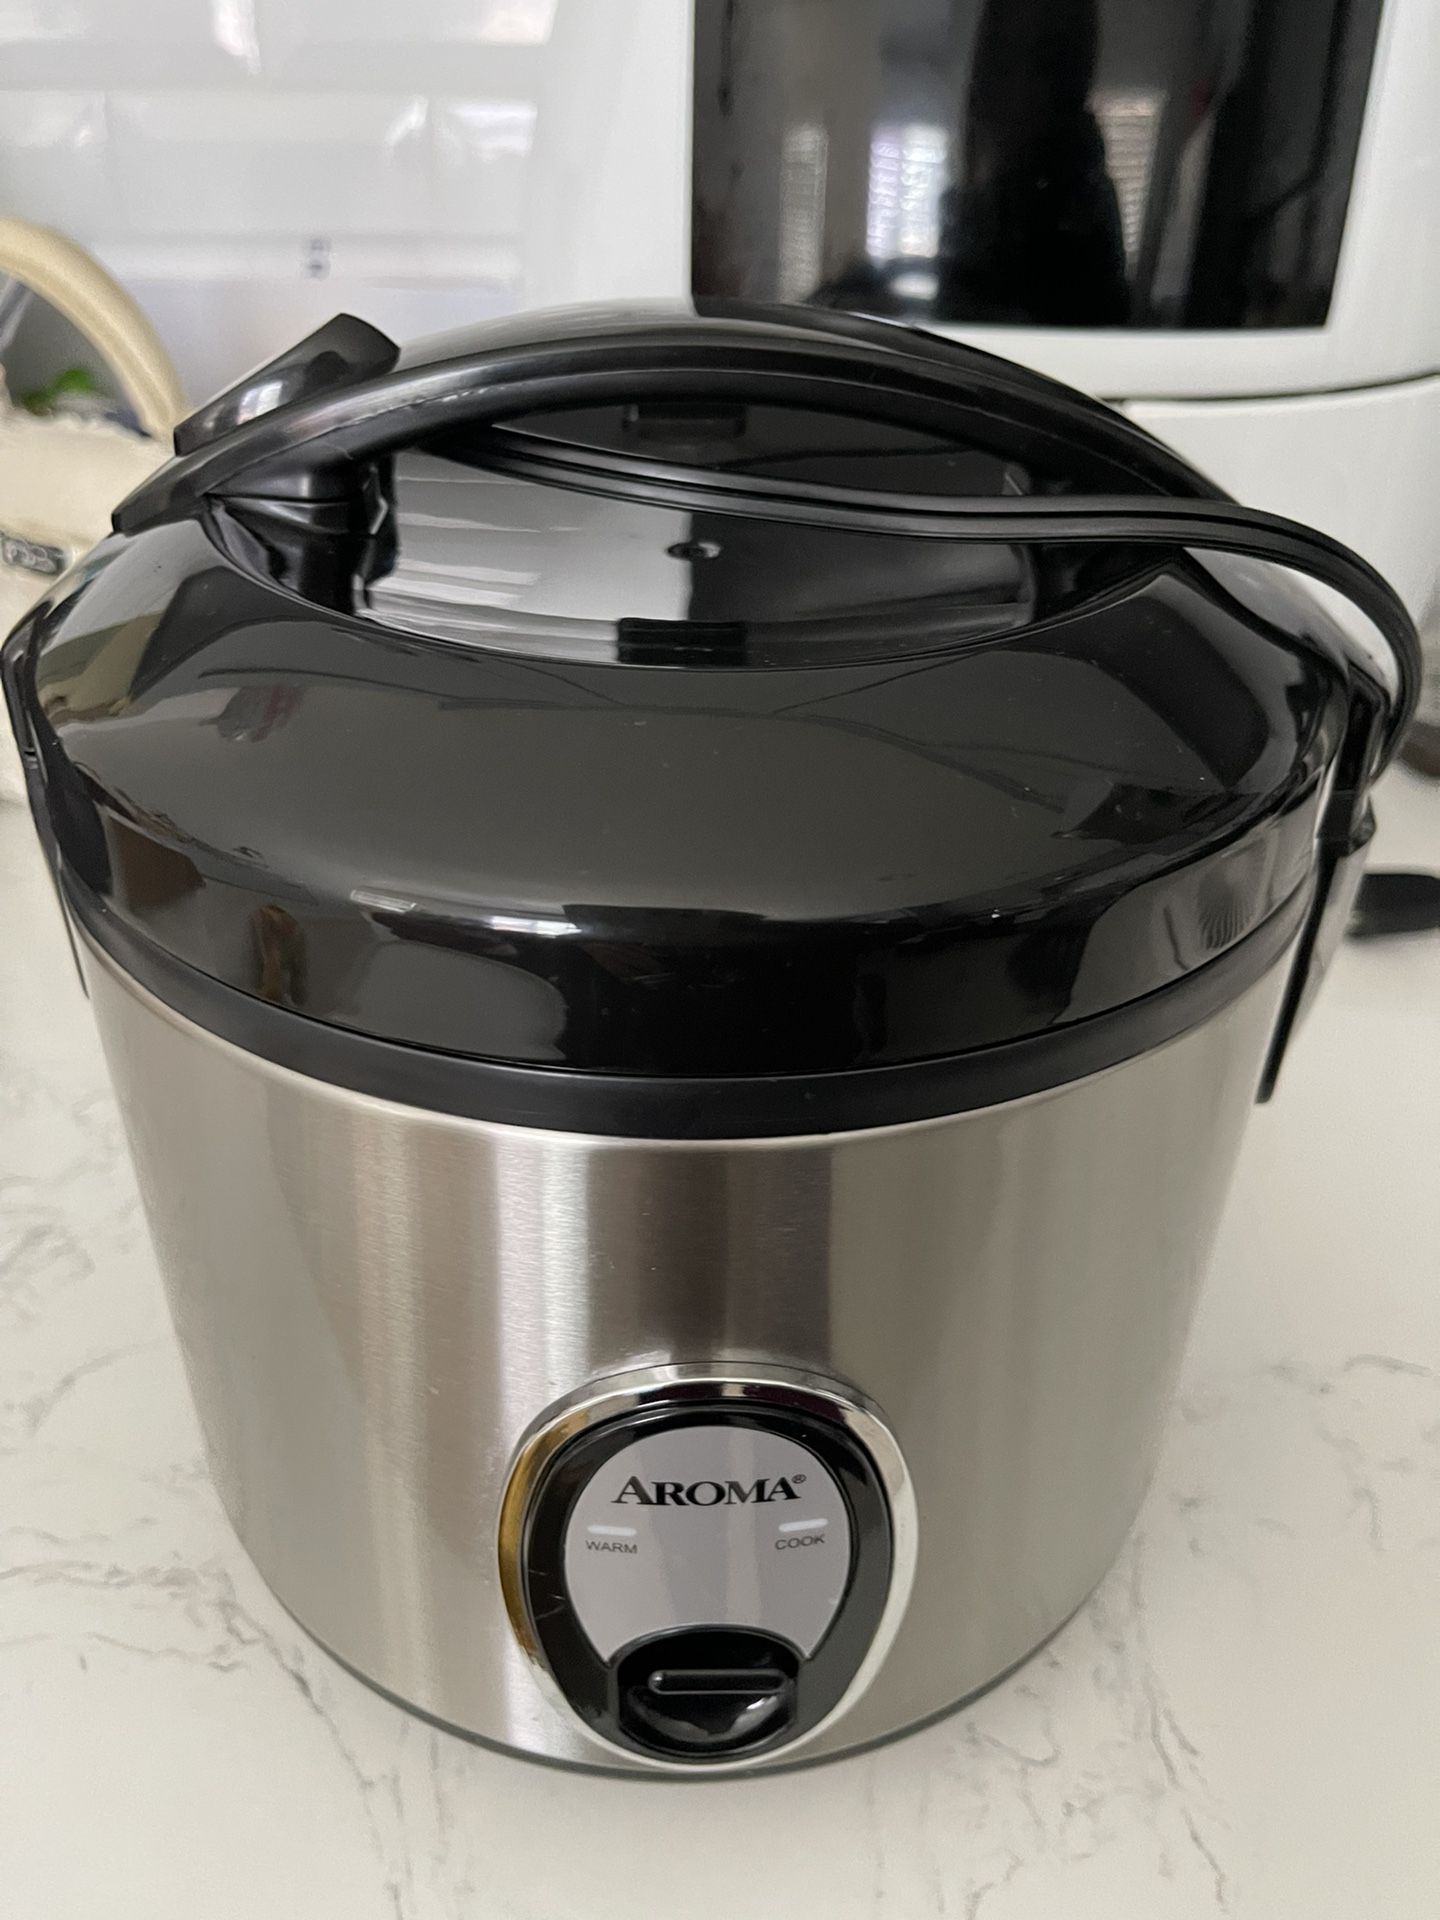 Aroma professional aroma professional rice cooker micom sensor logic, 10 cup  ( uncooked) for Sale in Los Angeles, CA - OfferUp